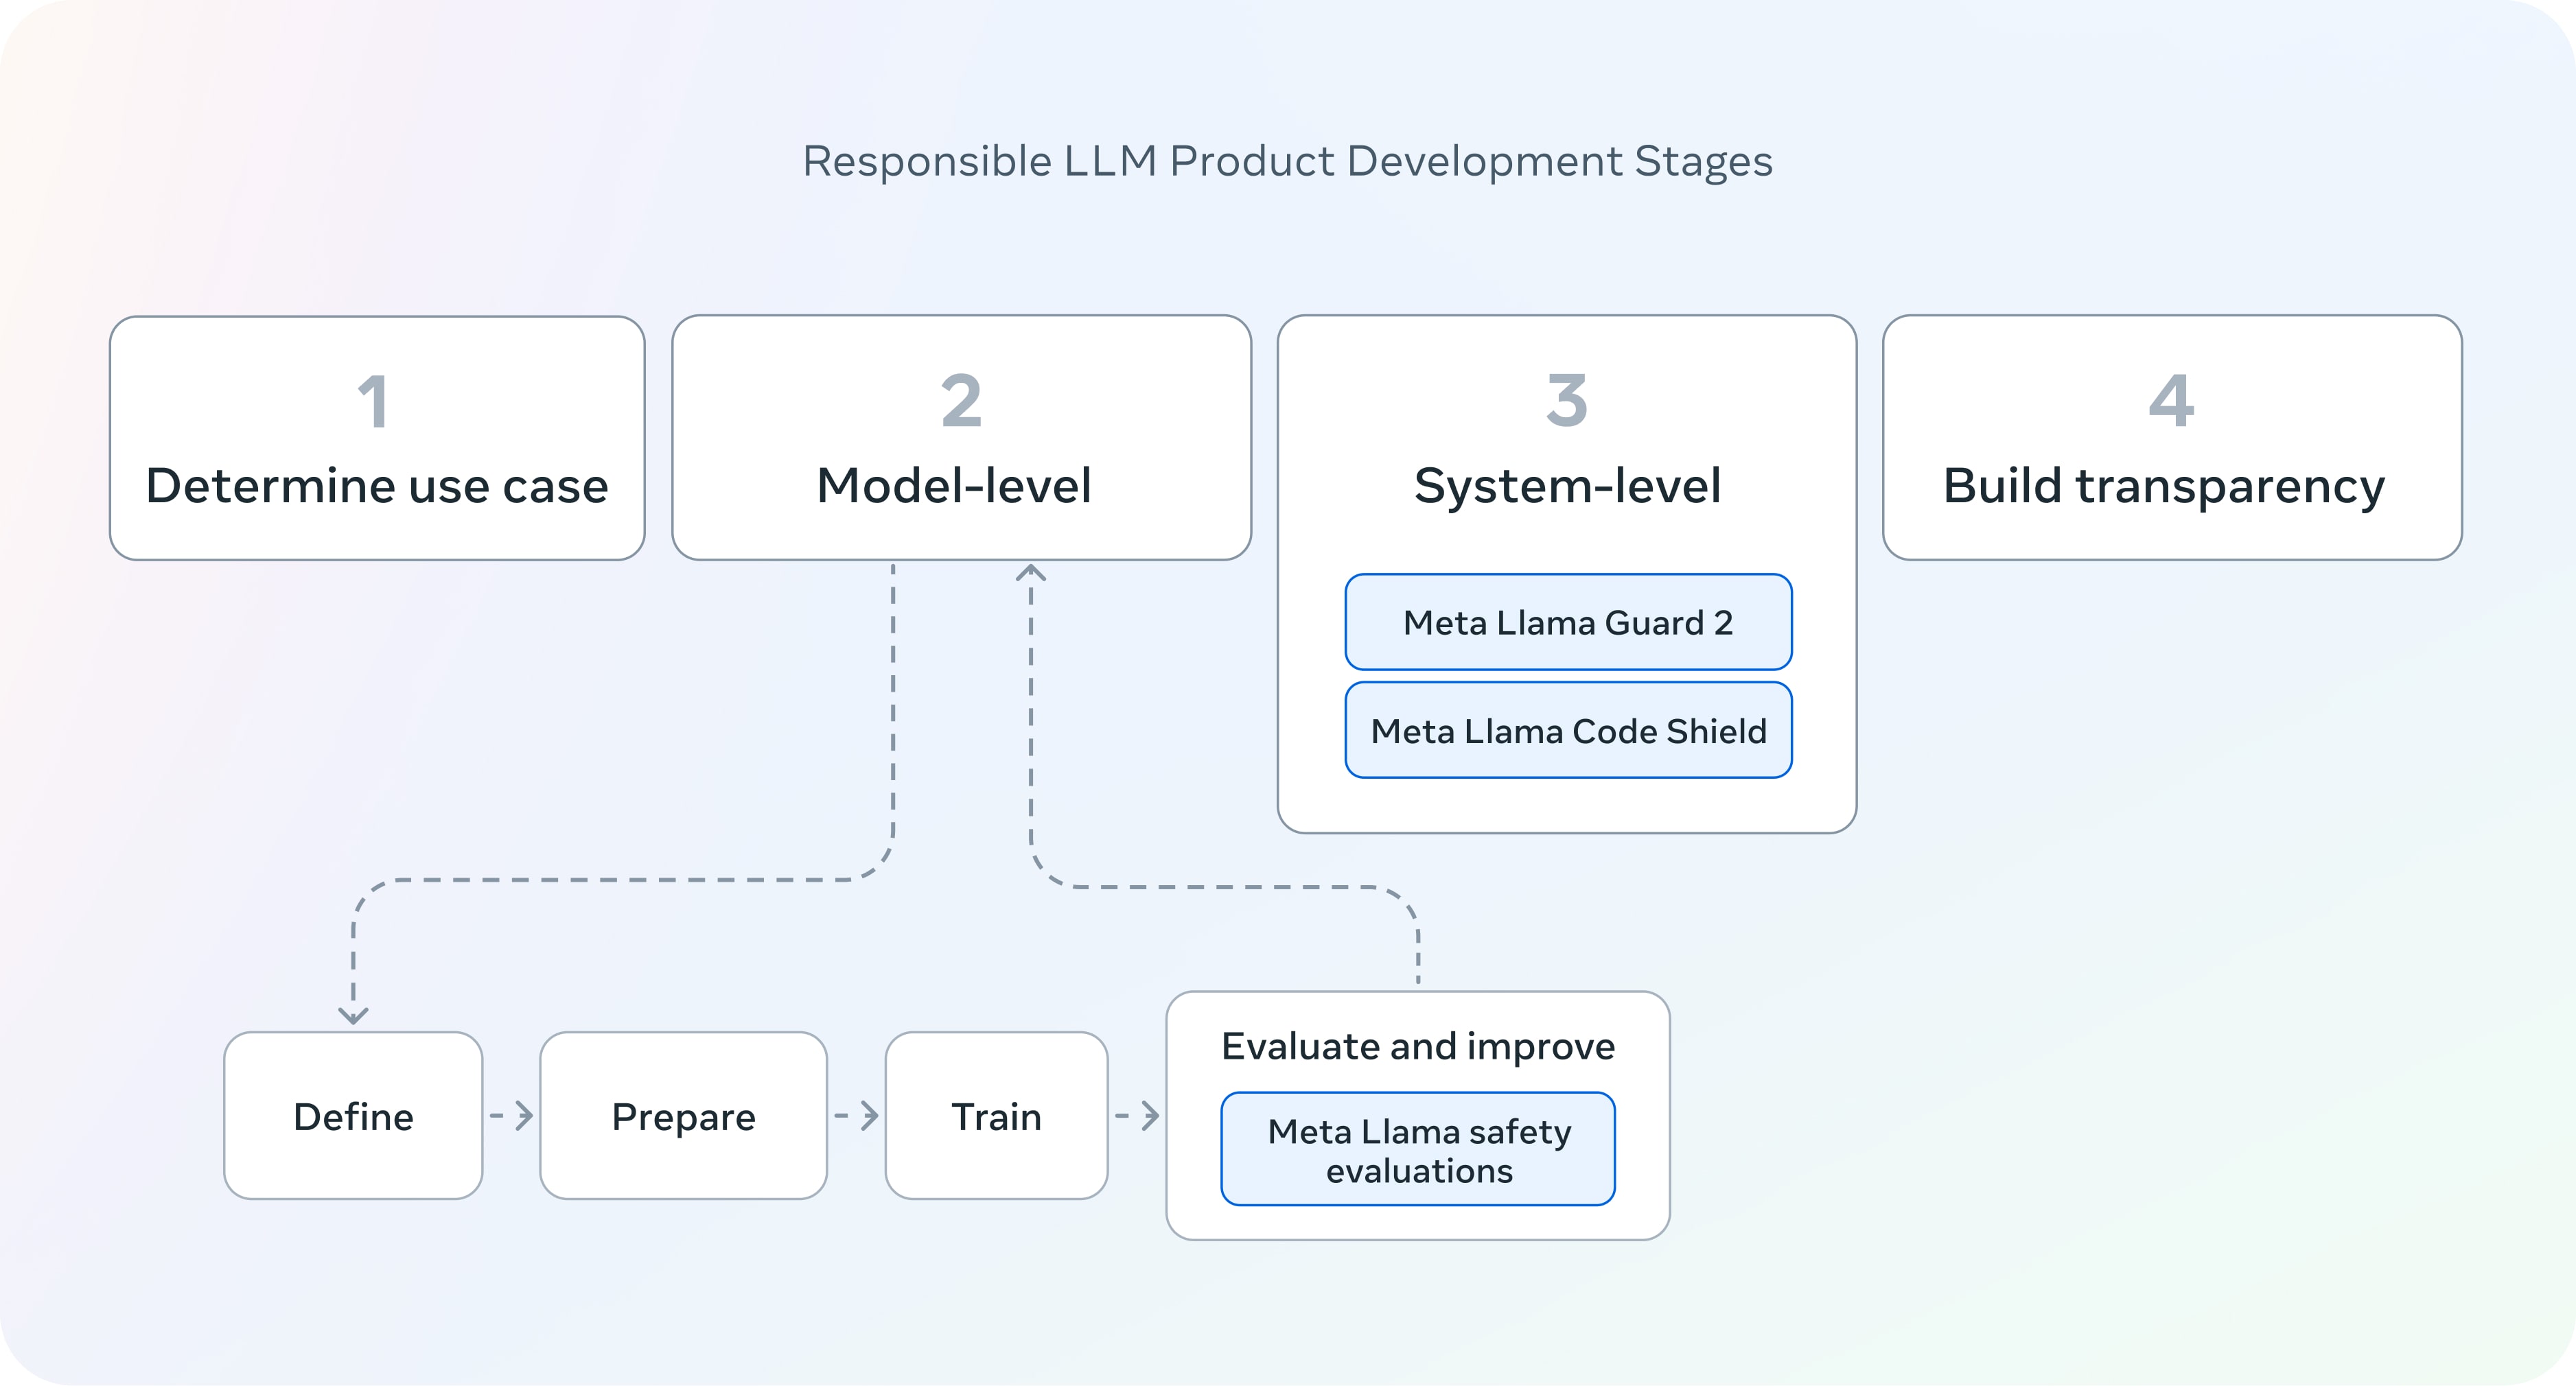 Responsible LLM Product Development Stages graphic